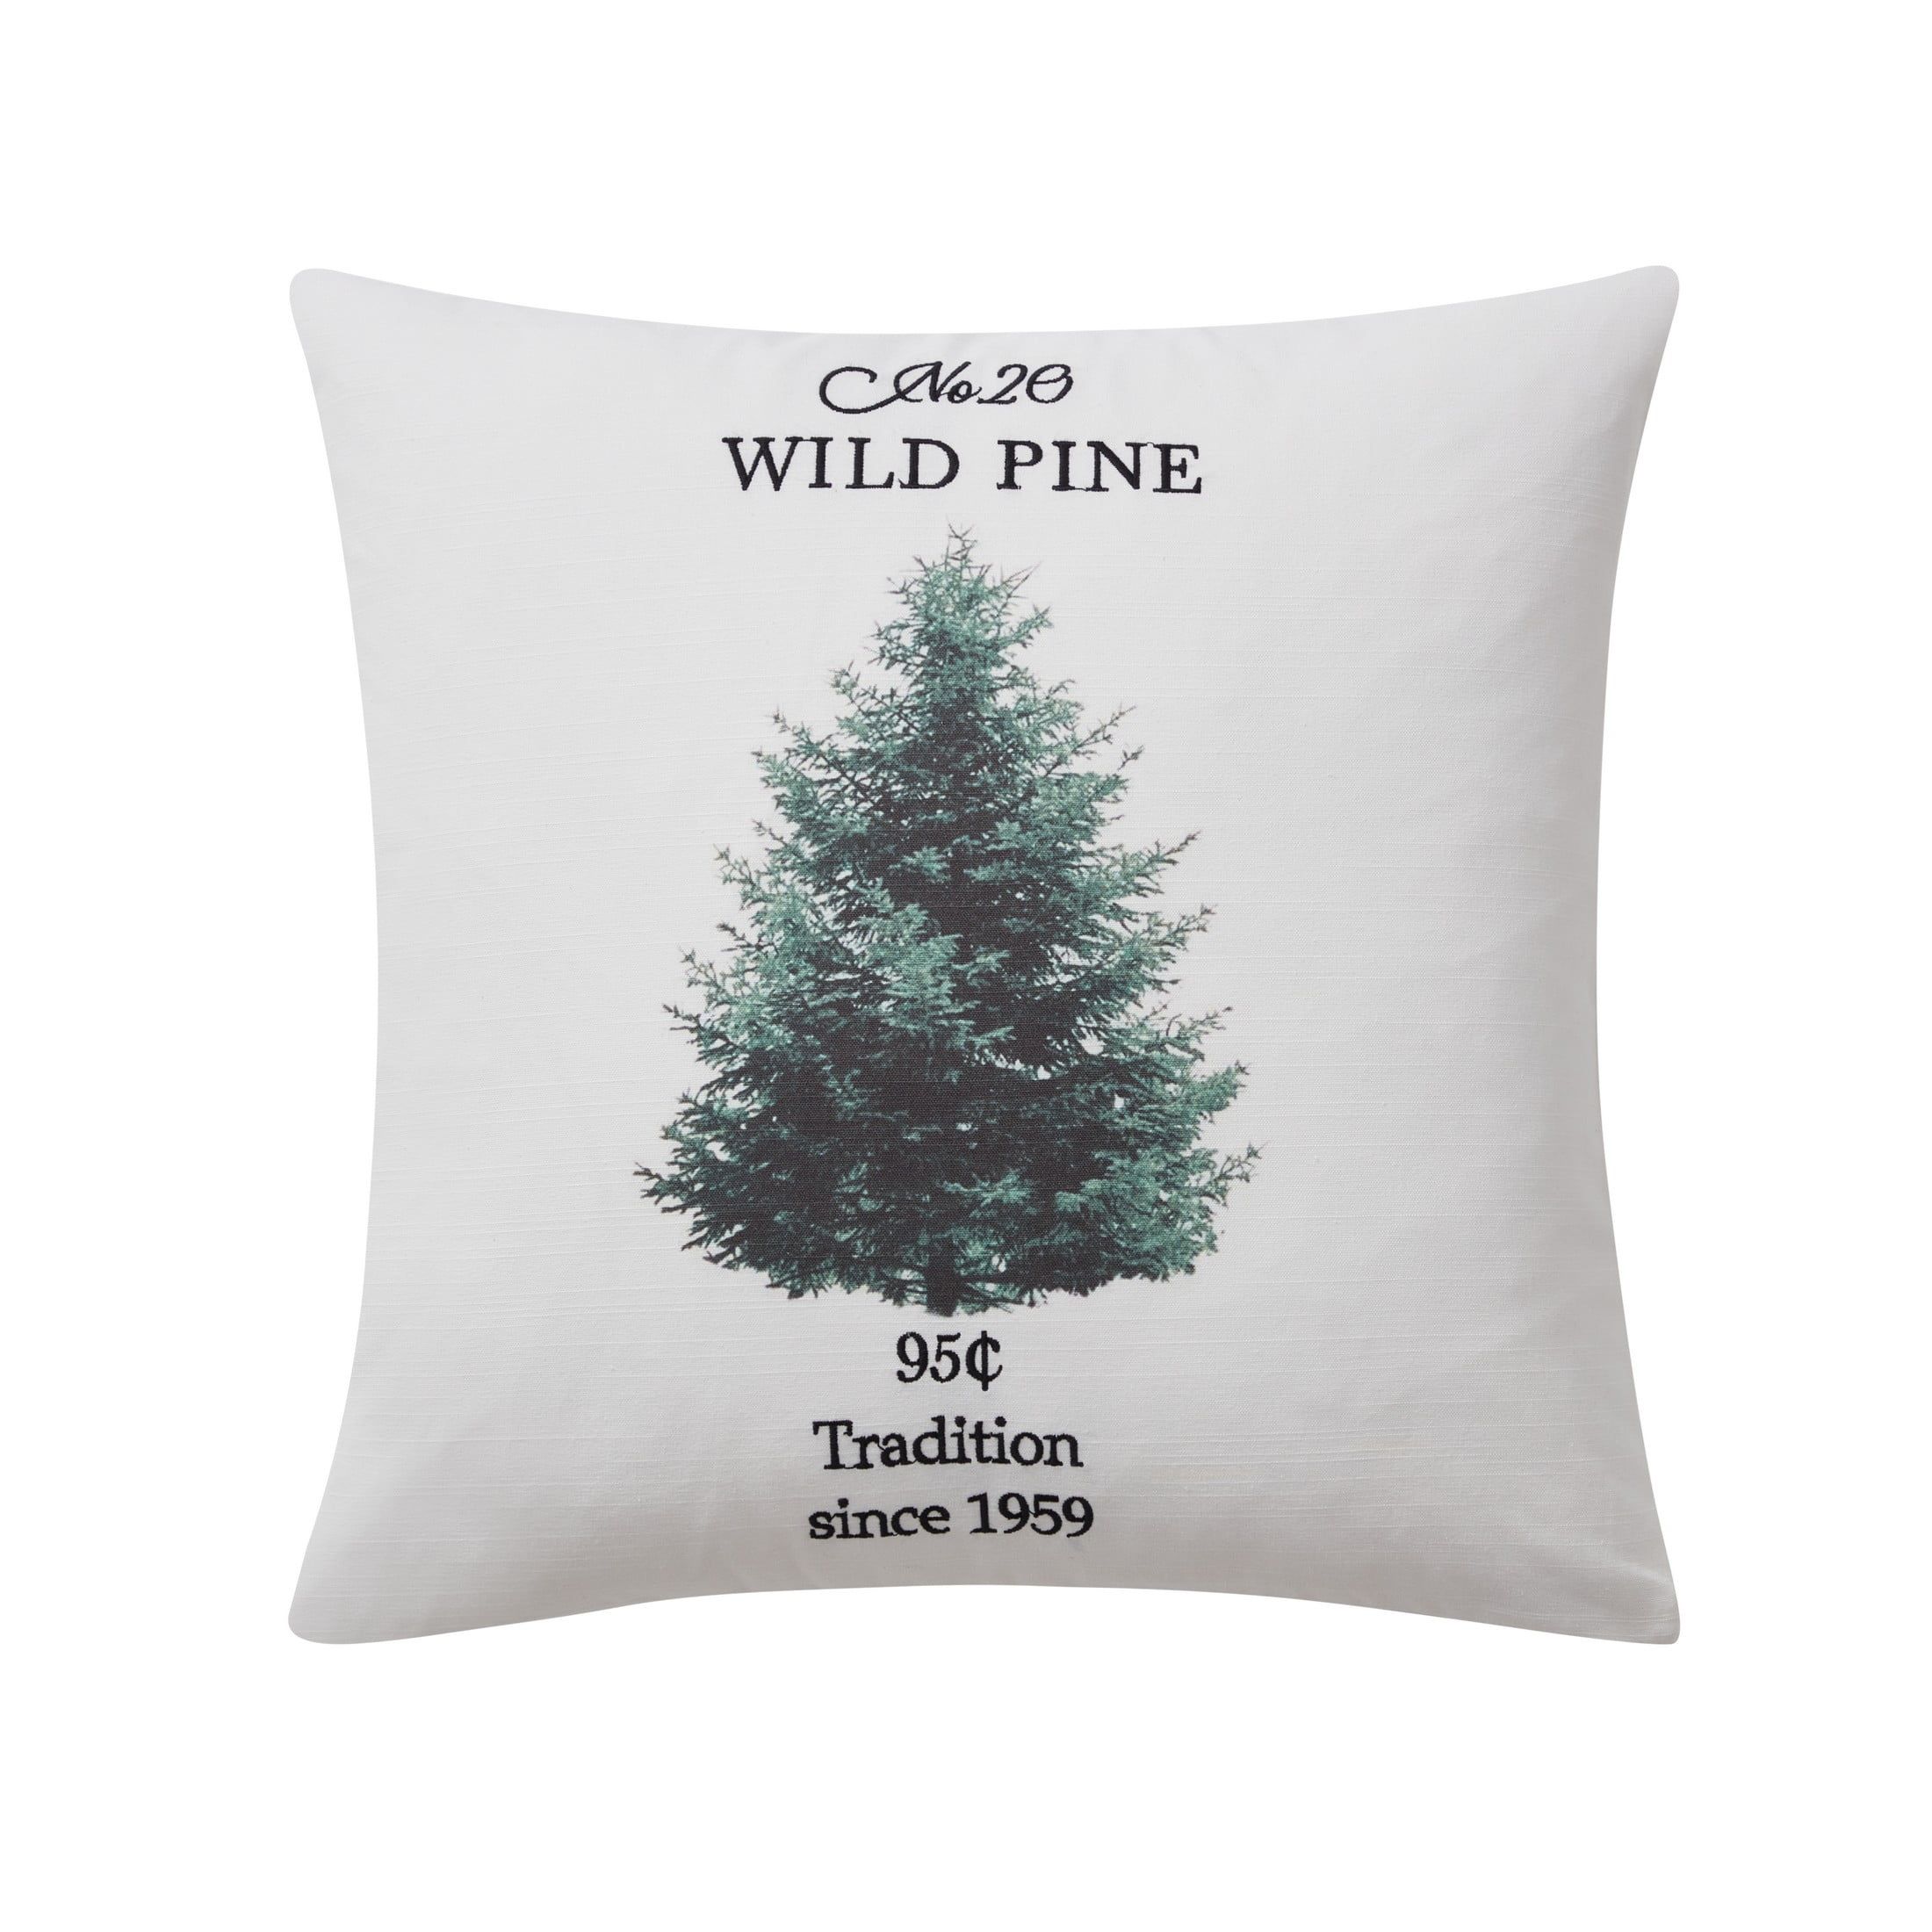 My Texas House Holiday Pine Tree Square Decorative Pillow Cover, 18" x 18", Multi | Walmart (US)